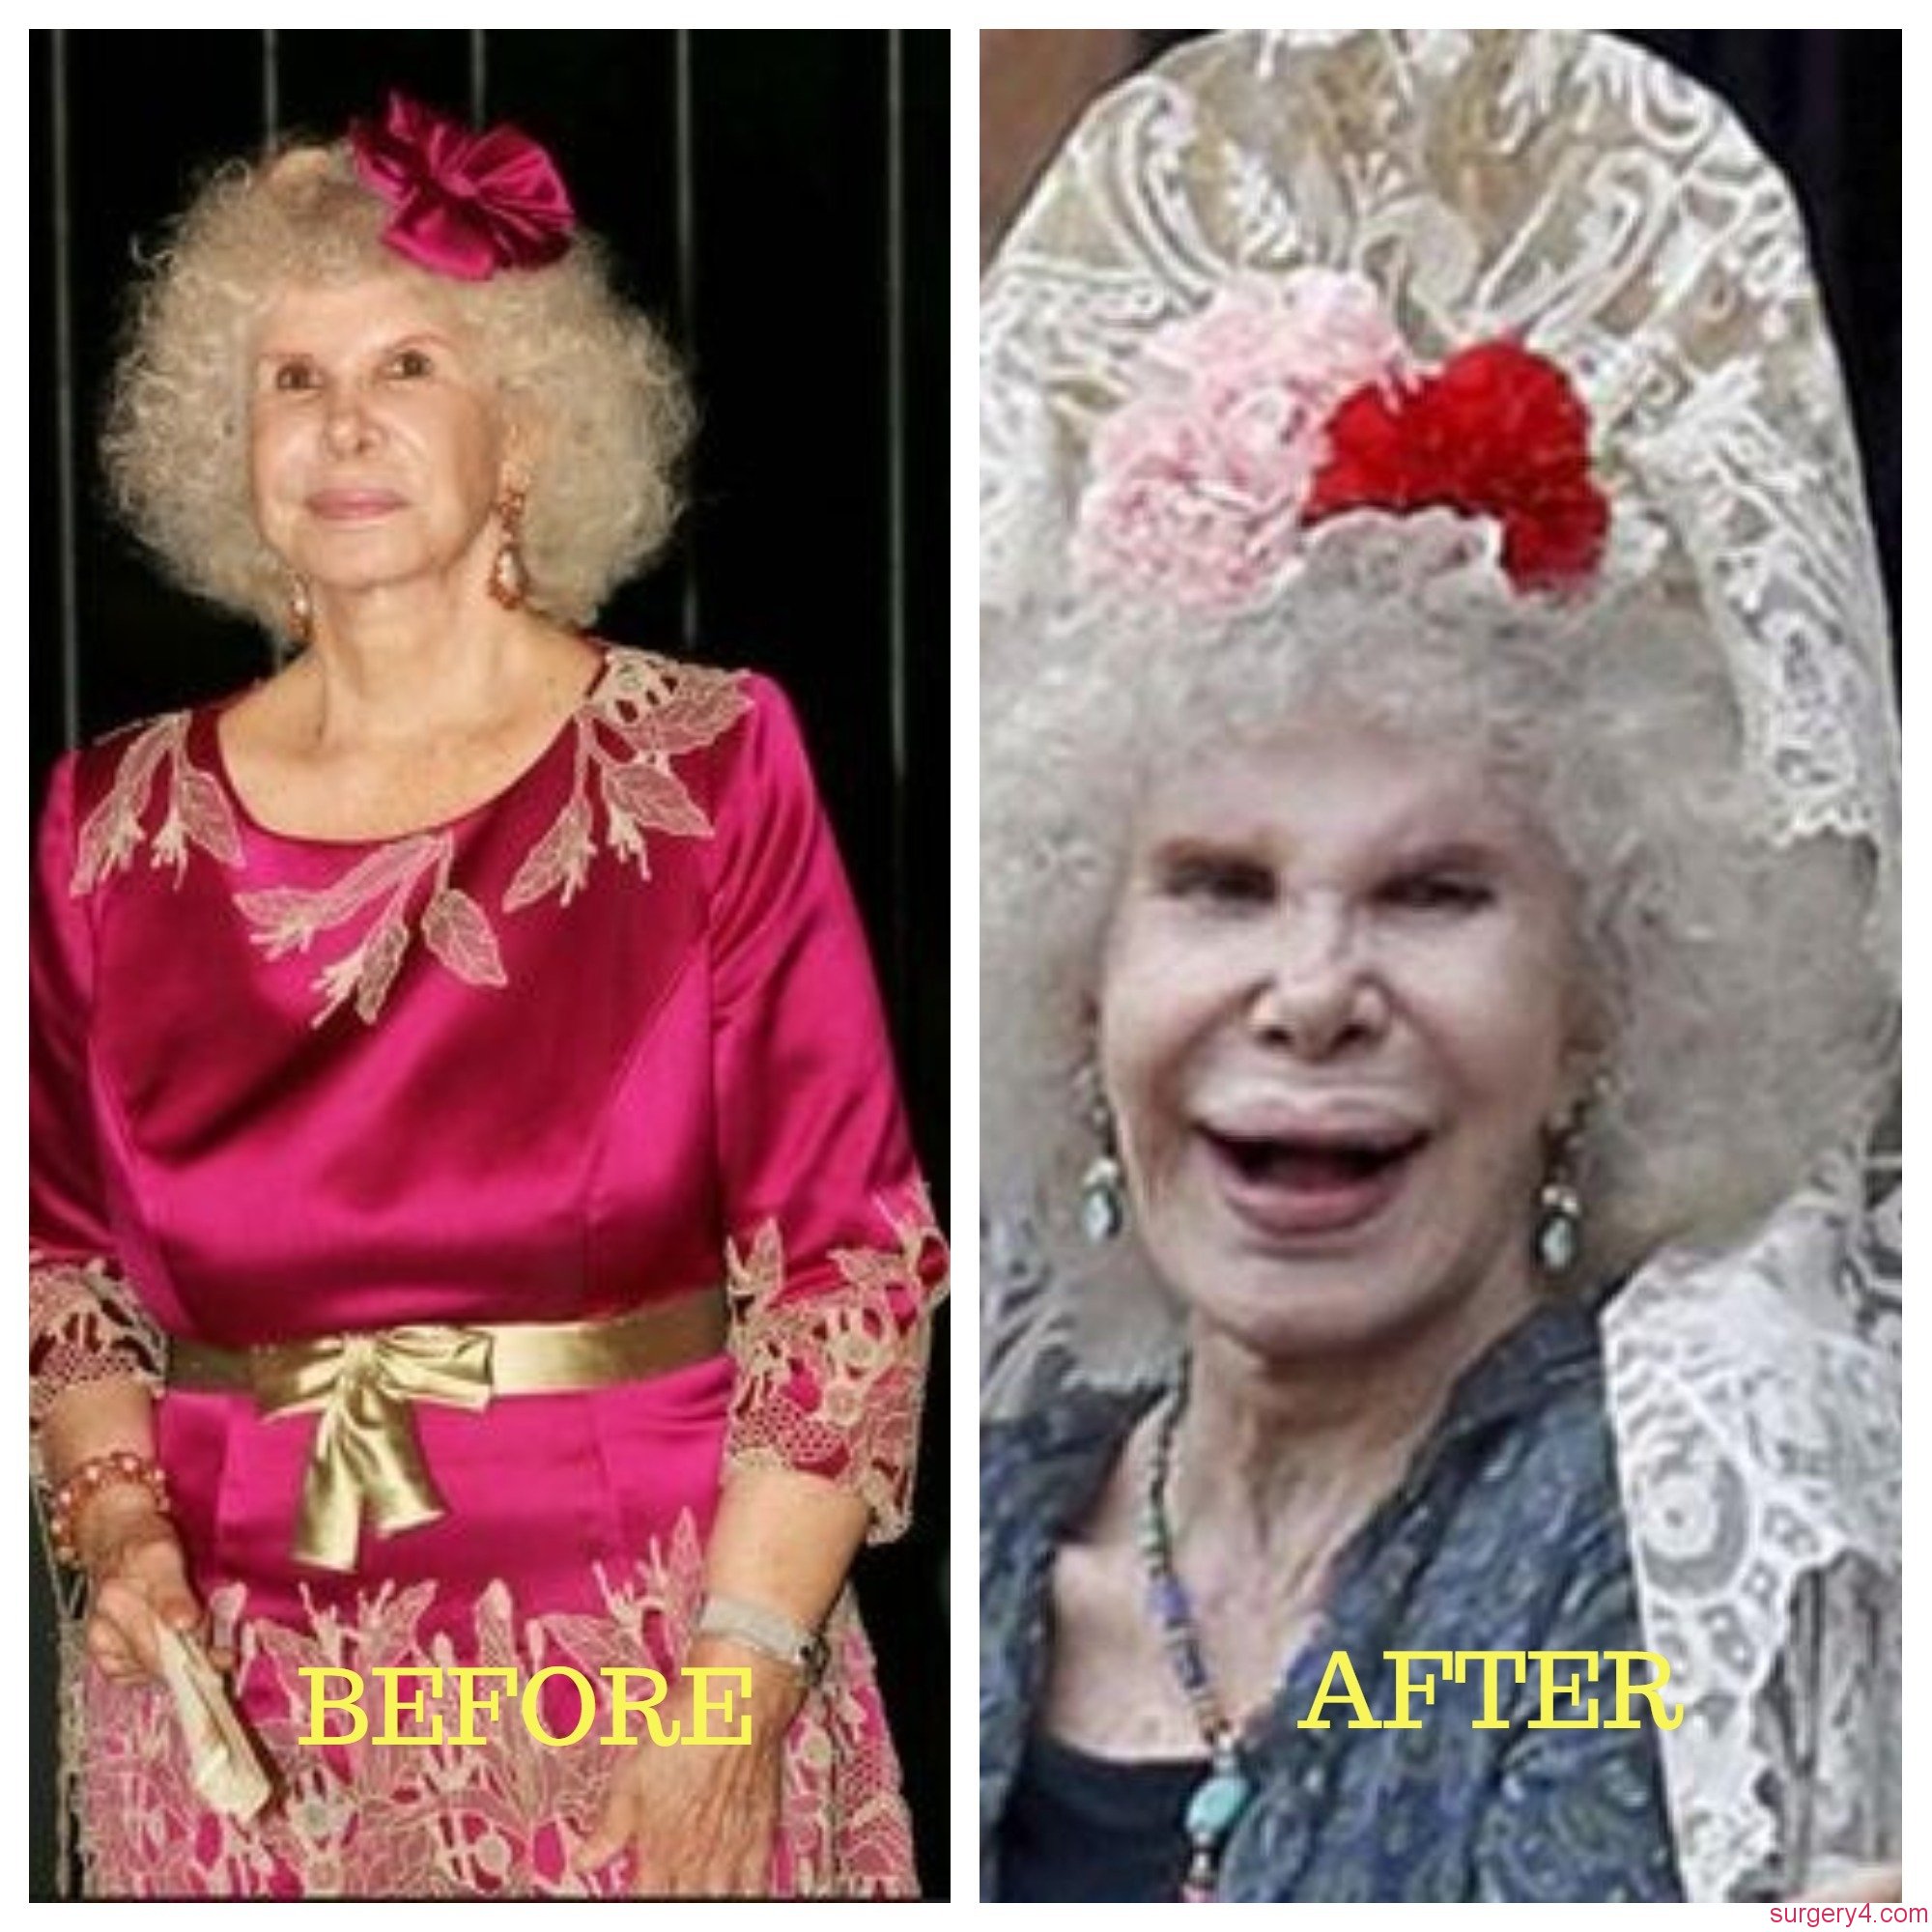 Duchess of Alba Plastic Surgery Photos [Before & After] - Surgery4.